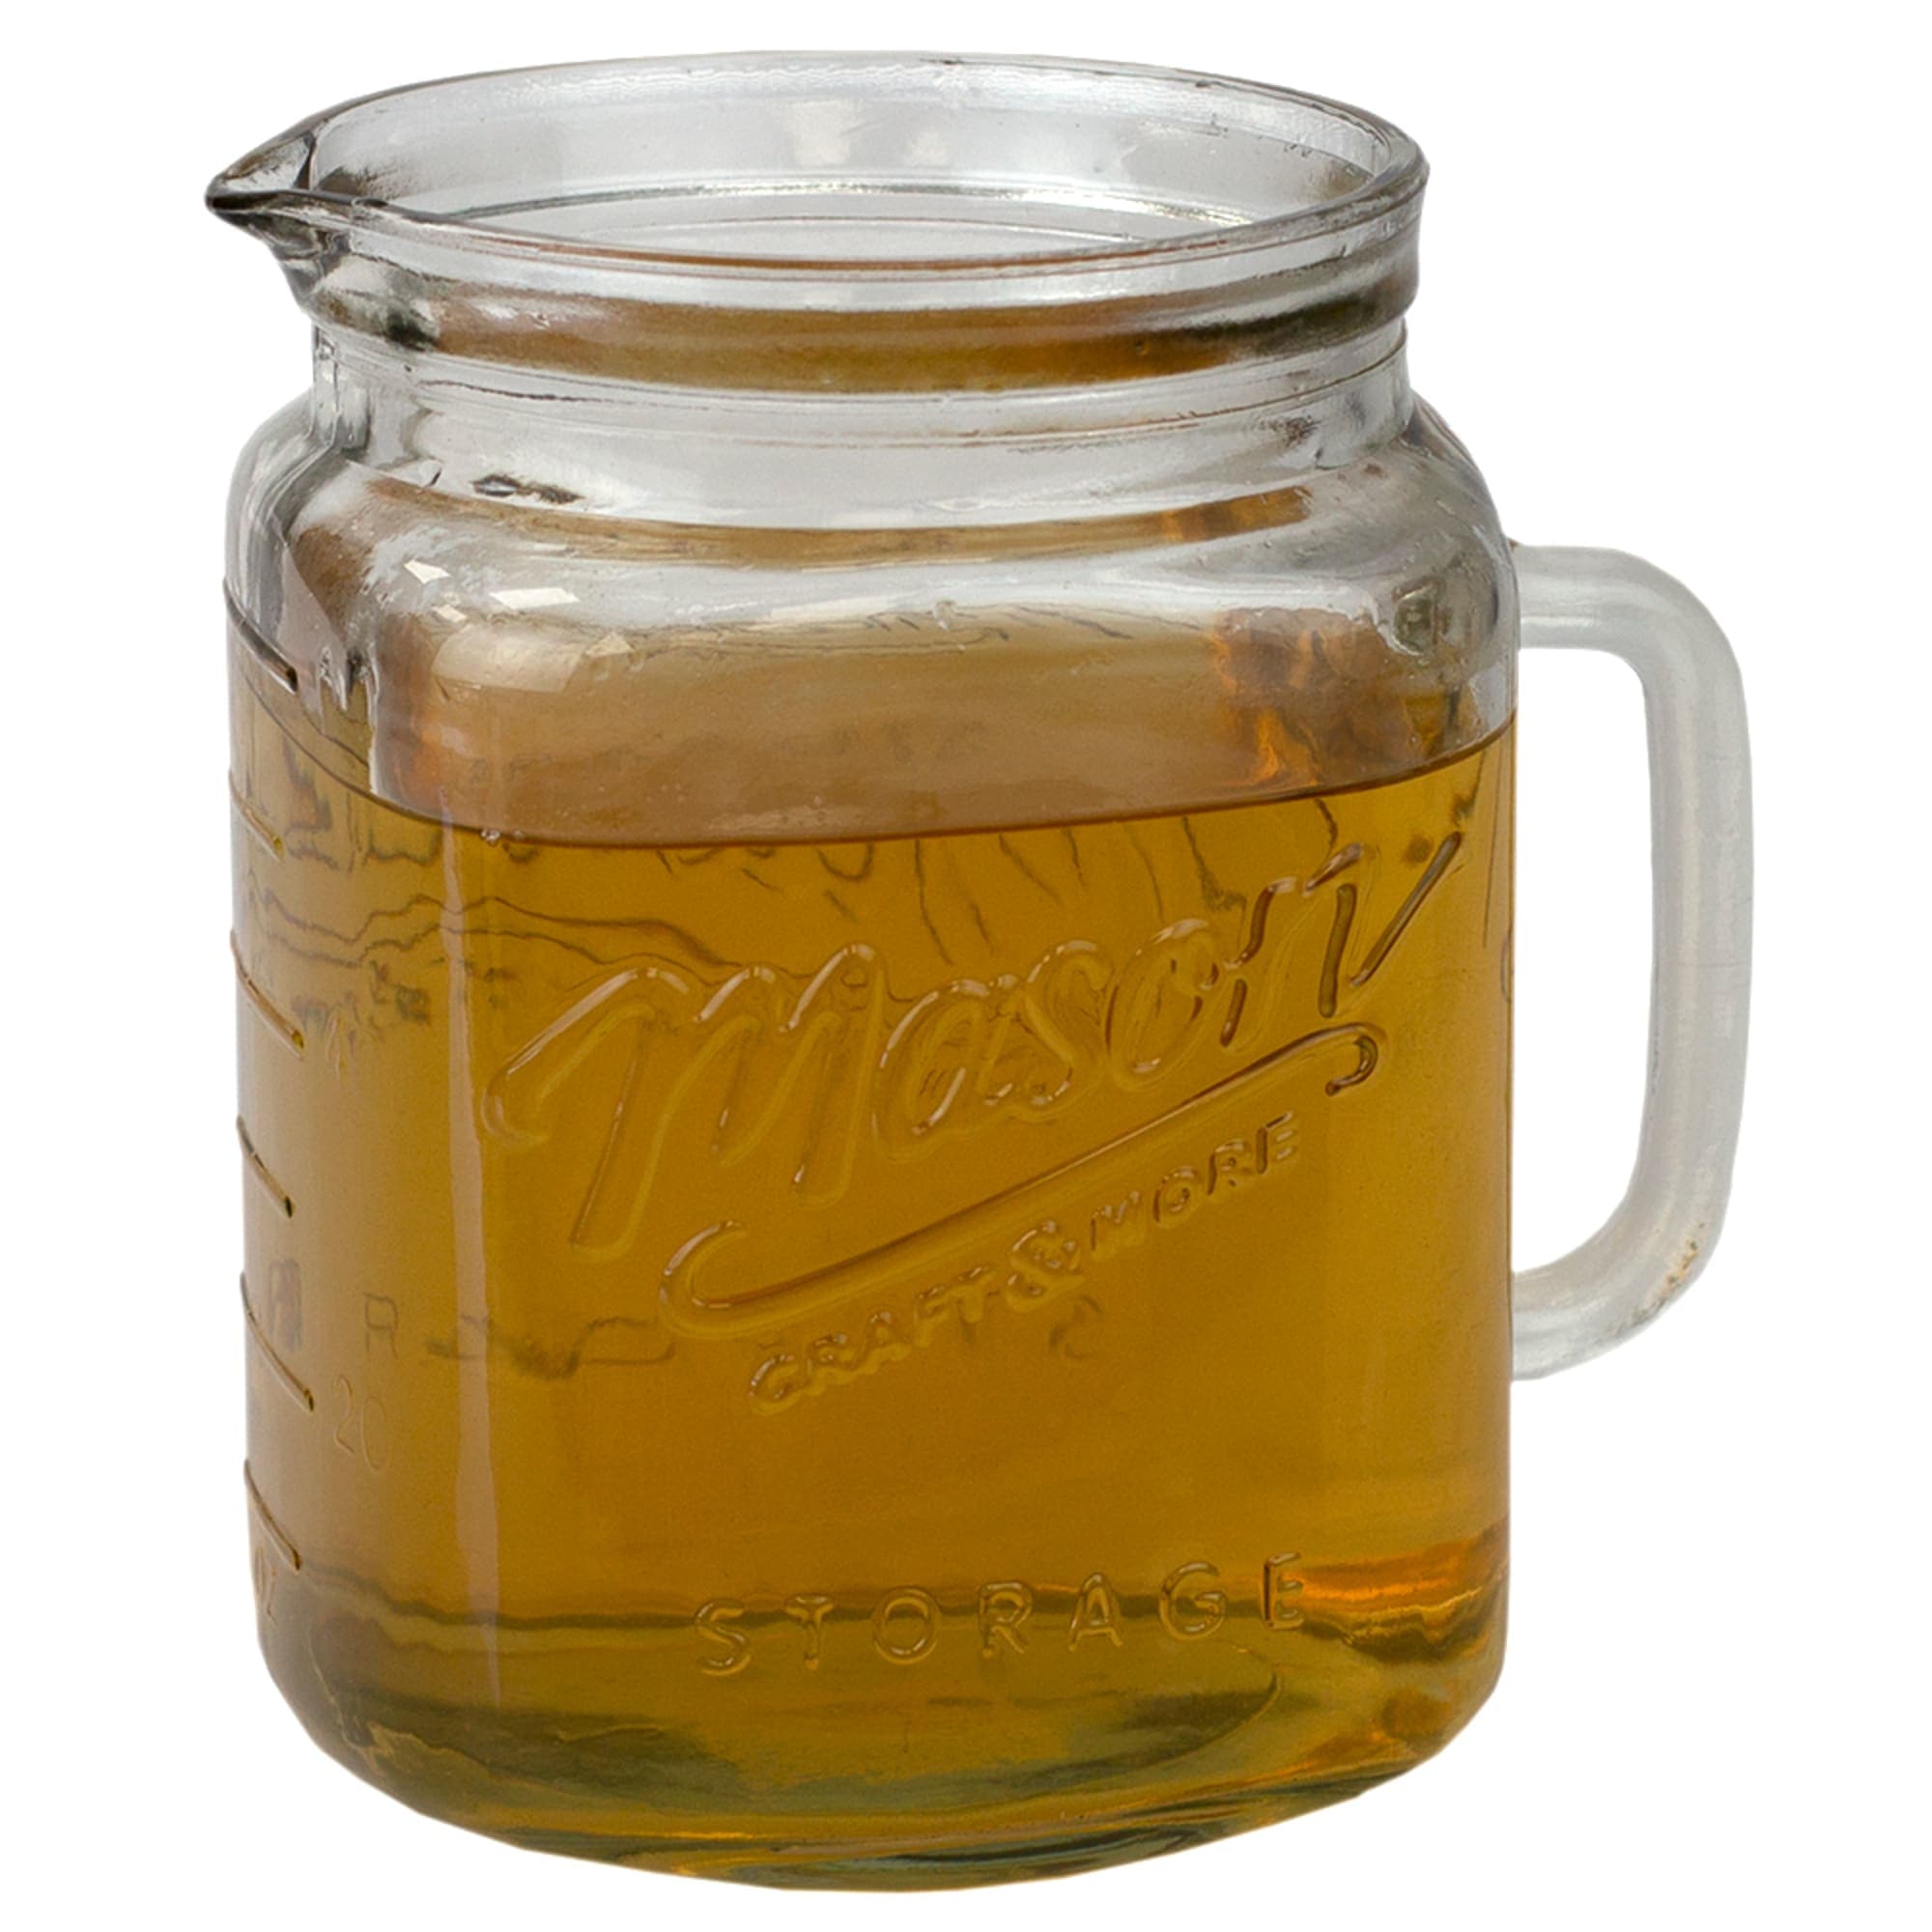 Home Basics 67.7 oz Glass Mason Jar Pitcher with Measurement Markings and Easy Grip Handle, Clear $3.00 EACH, CASE PACK OF 6